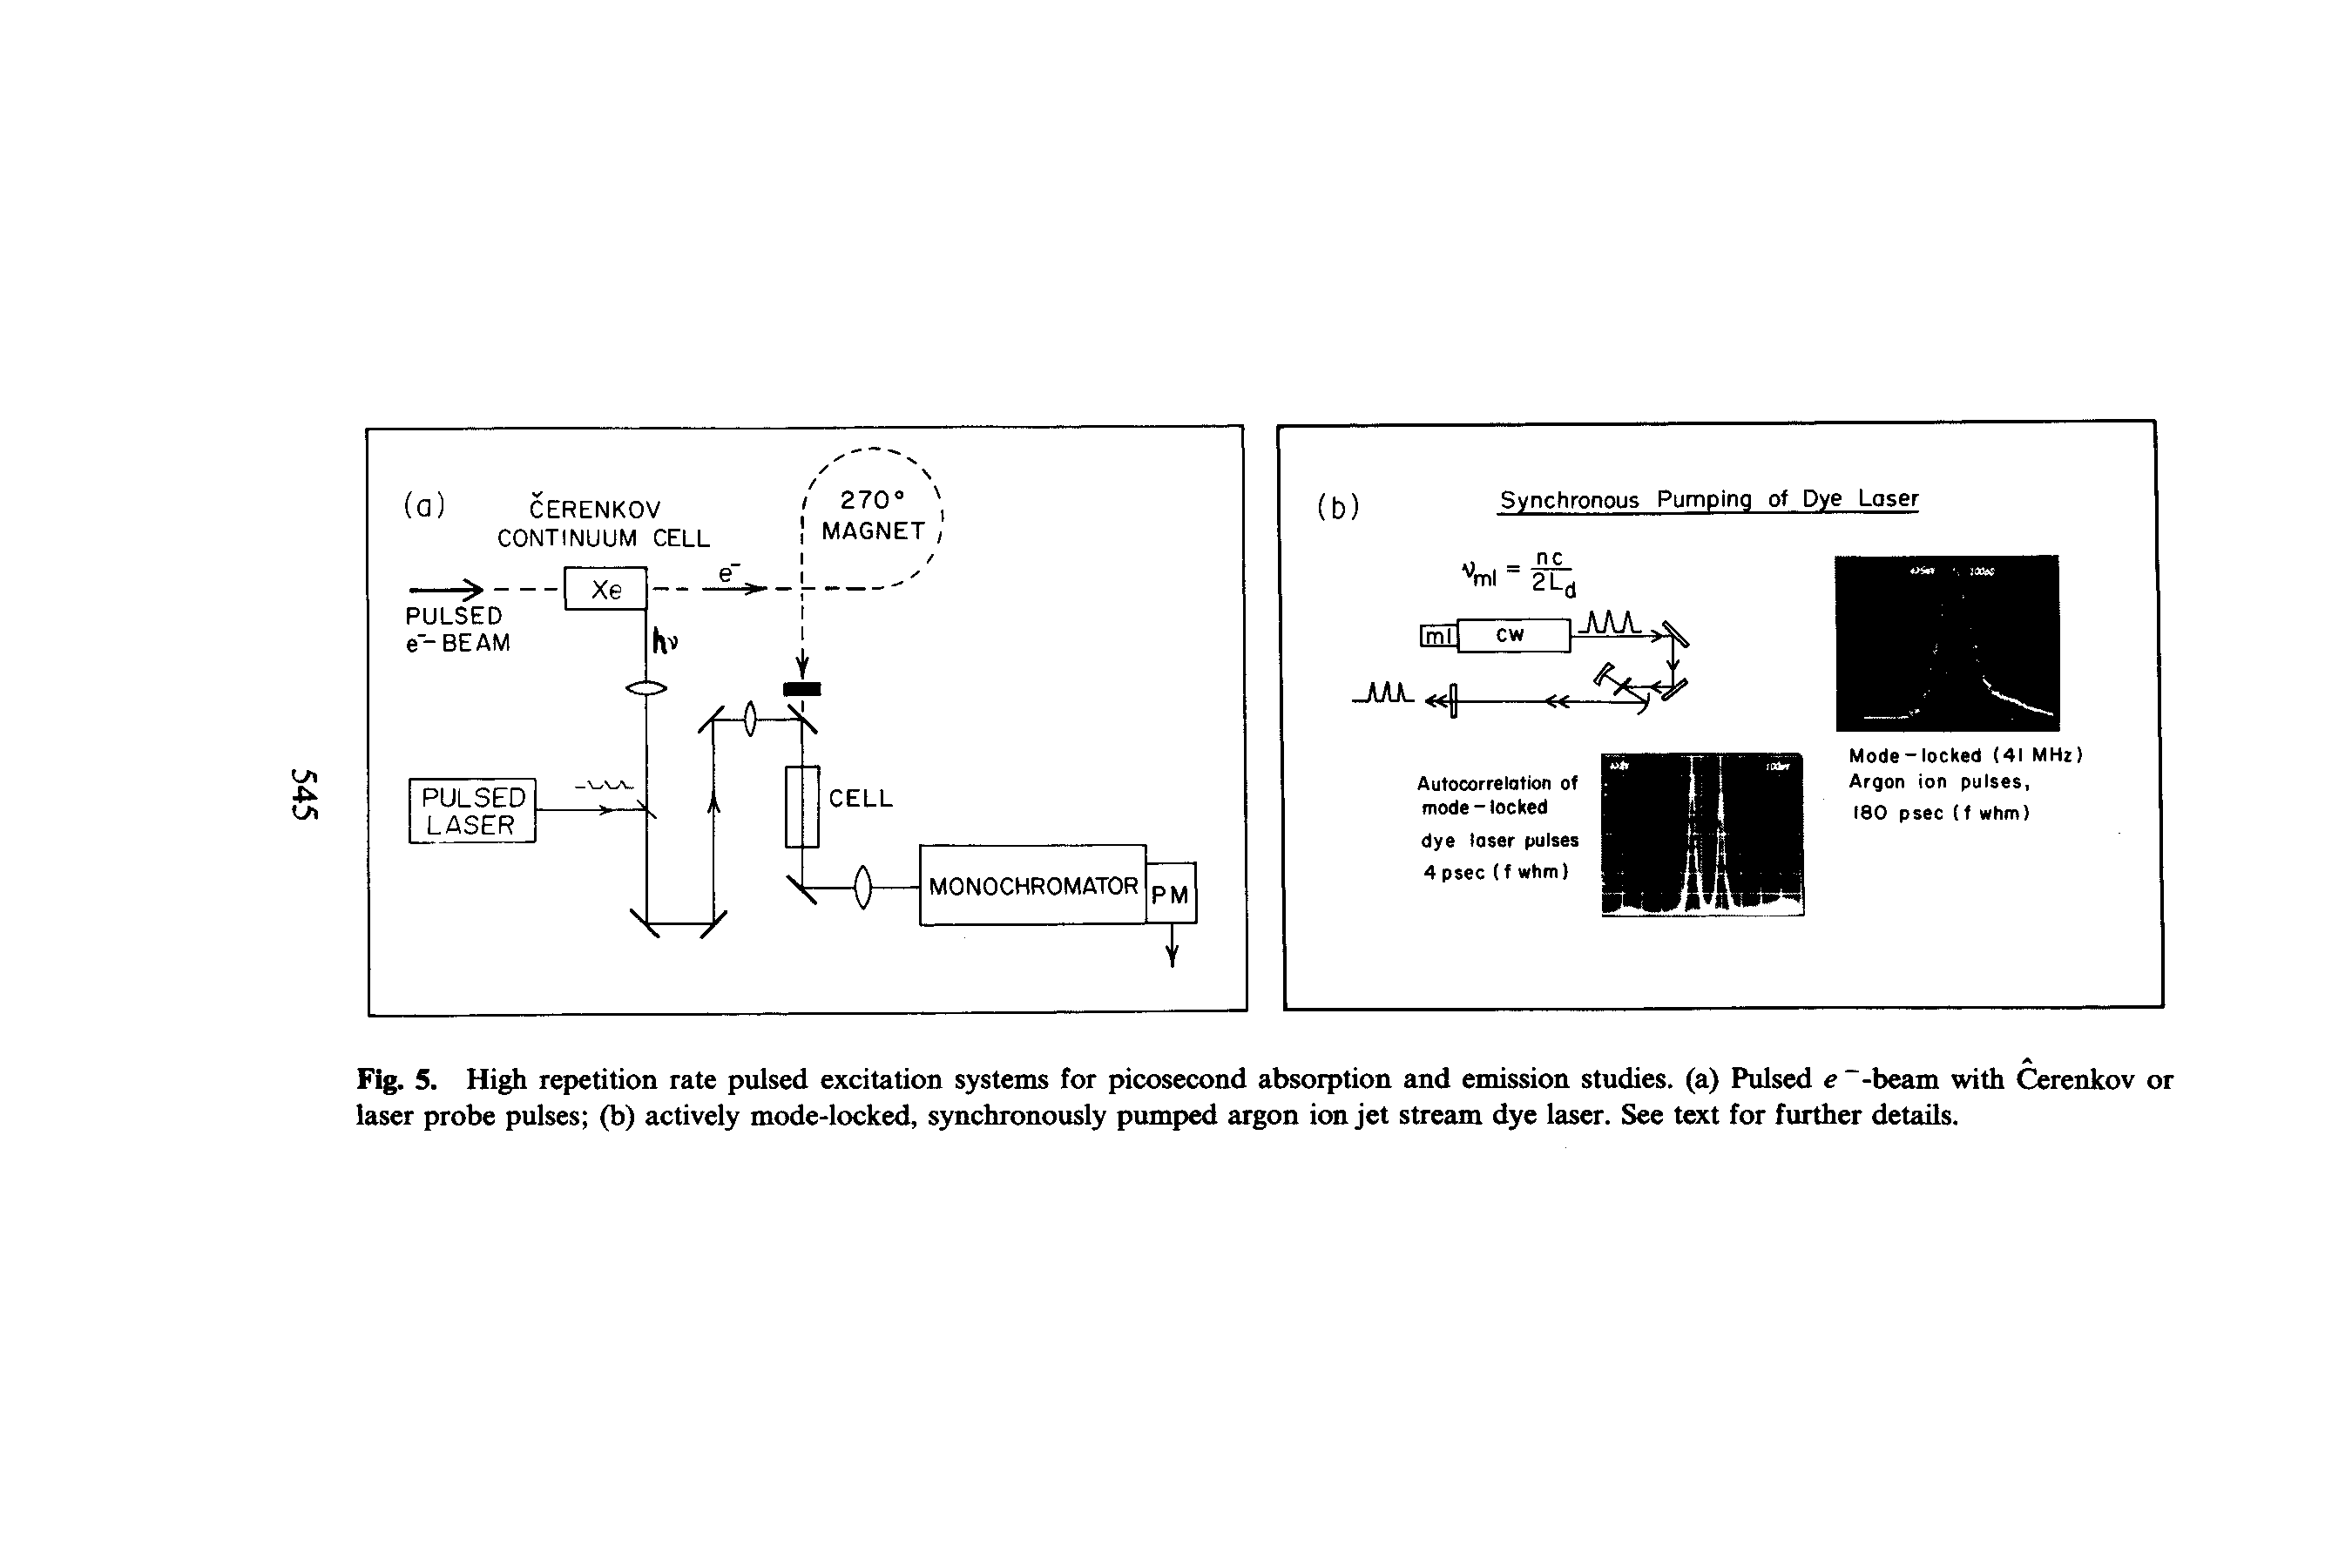 Fig. 5. High repetition rate pulsed excitation systems for picosecond absorption and emission studies, (a) Pulsed e -beam with Cerenkov or laser probe pulses (b) actively mode-locked, synchronously pumped argon ion jet stream dye laser. See text for further details.